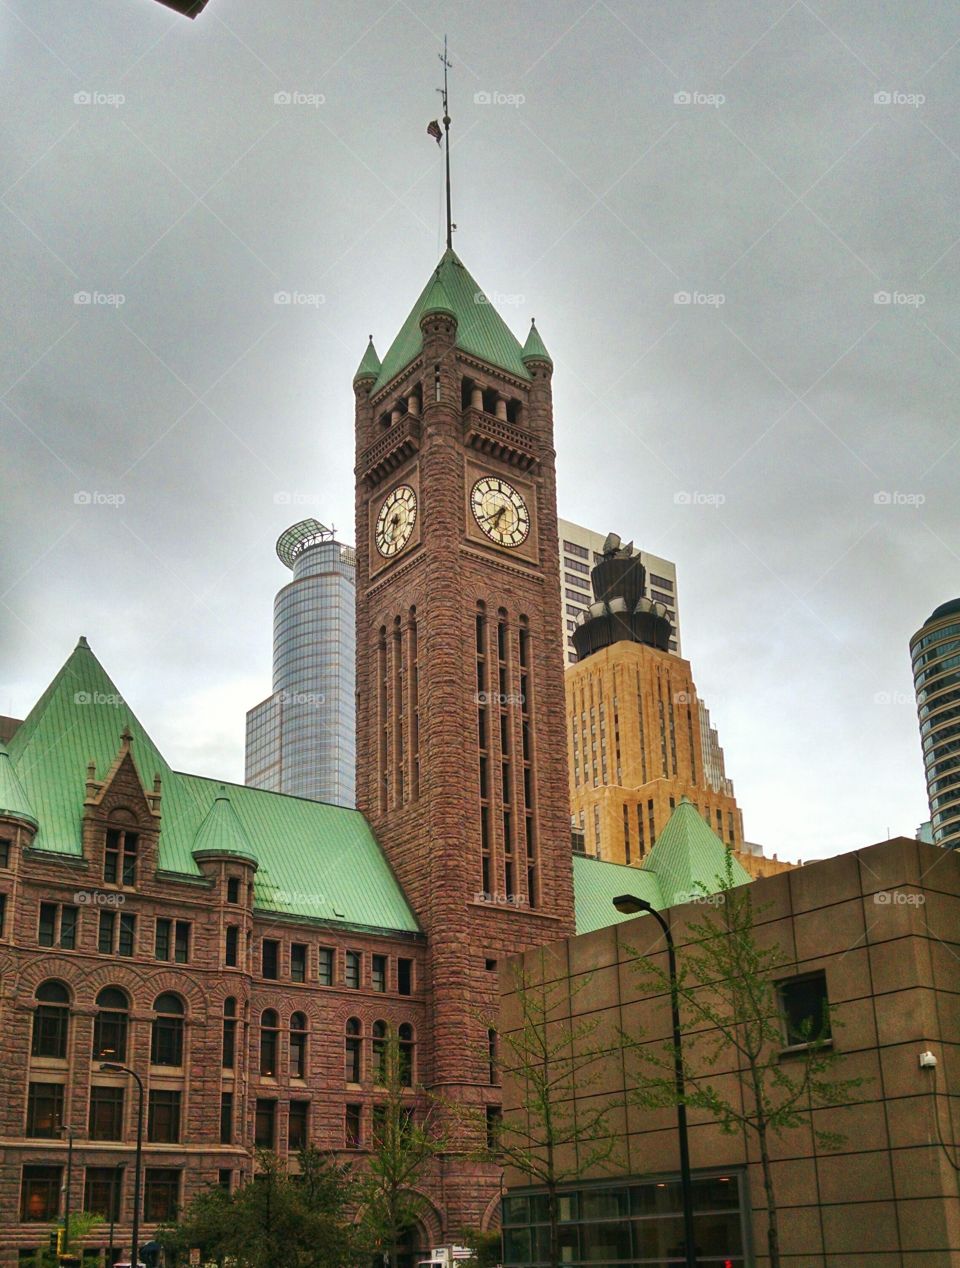 Minneapolis City Hall. picture of City Hall taken on misty and rainy morning.